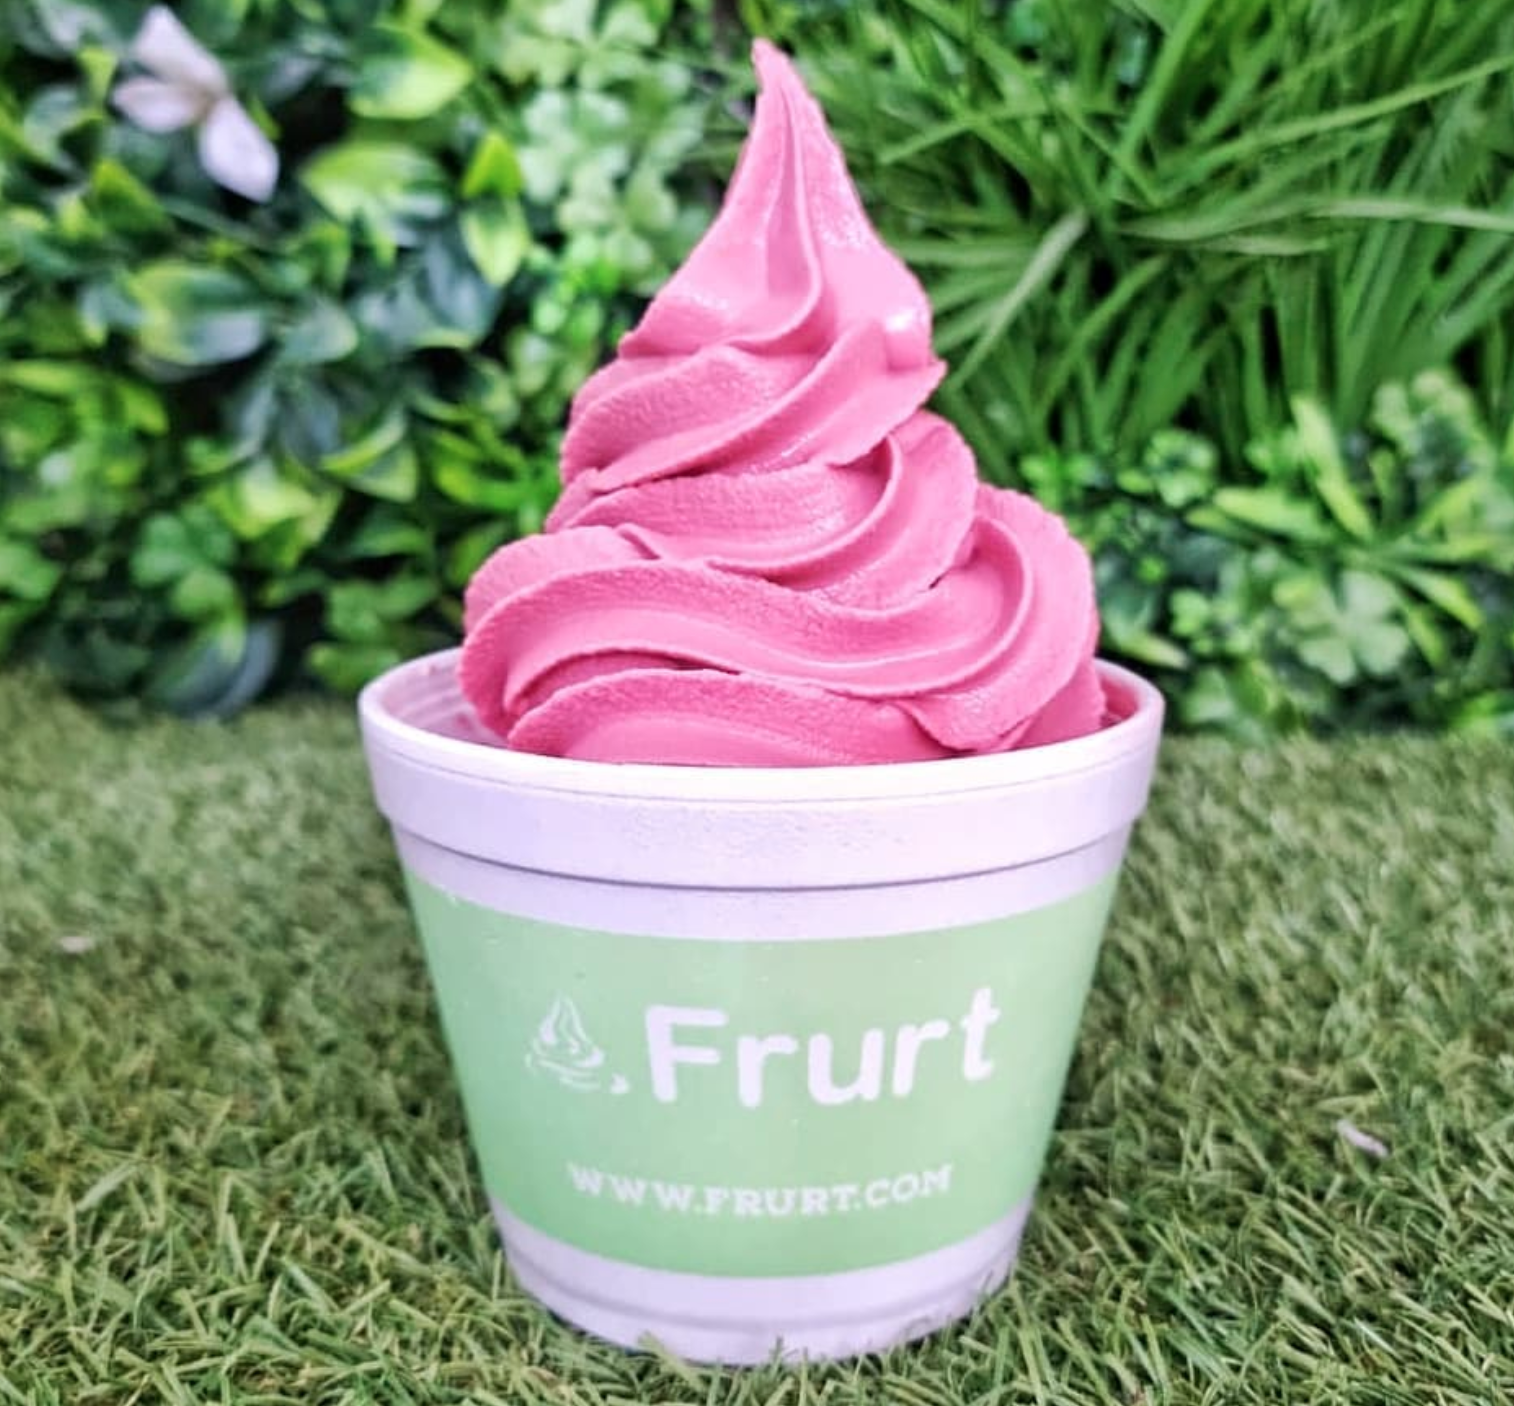 These Manchester dessert parlours are serving dog-friendly frozen treats all summer, The Manc